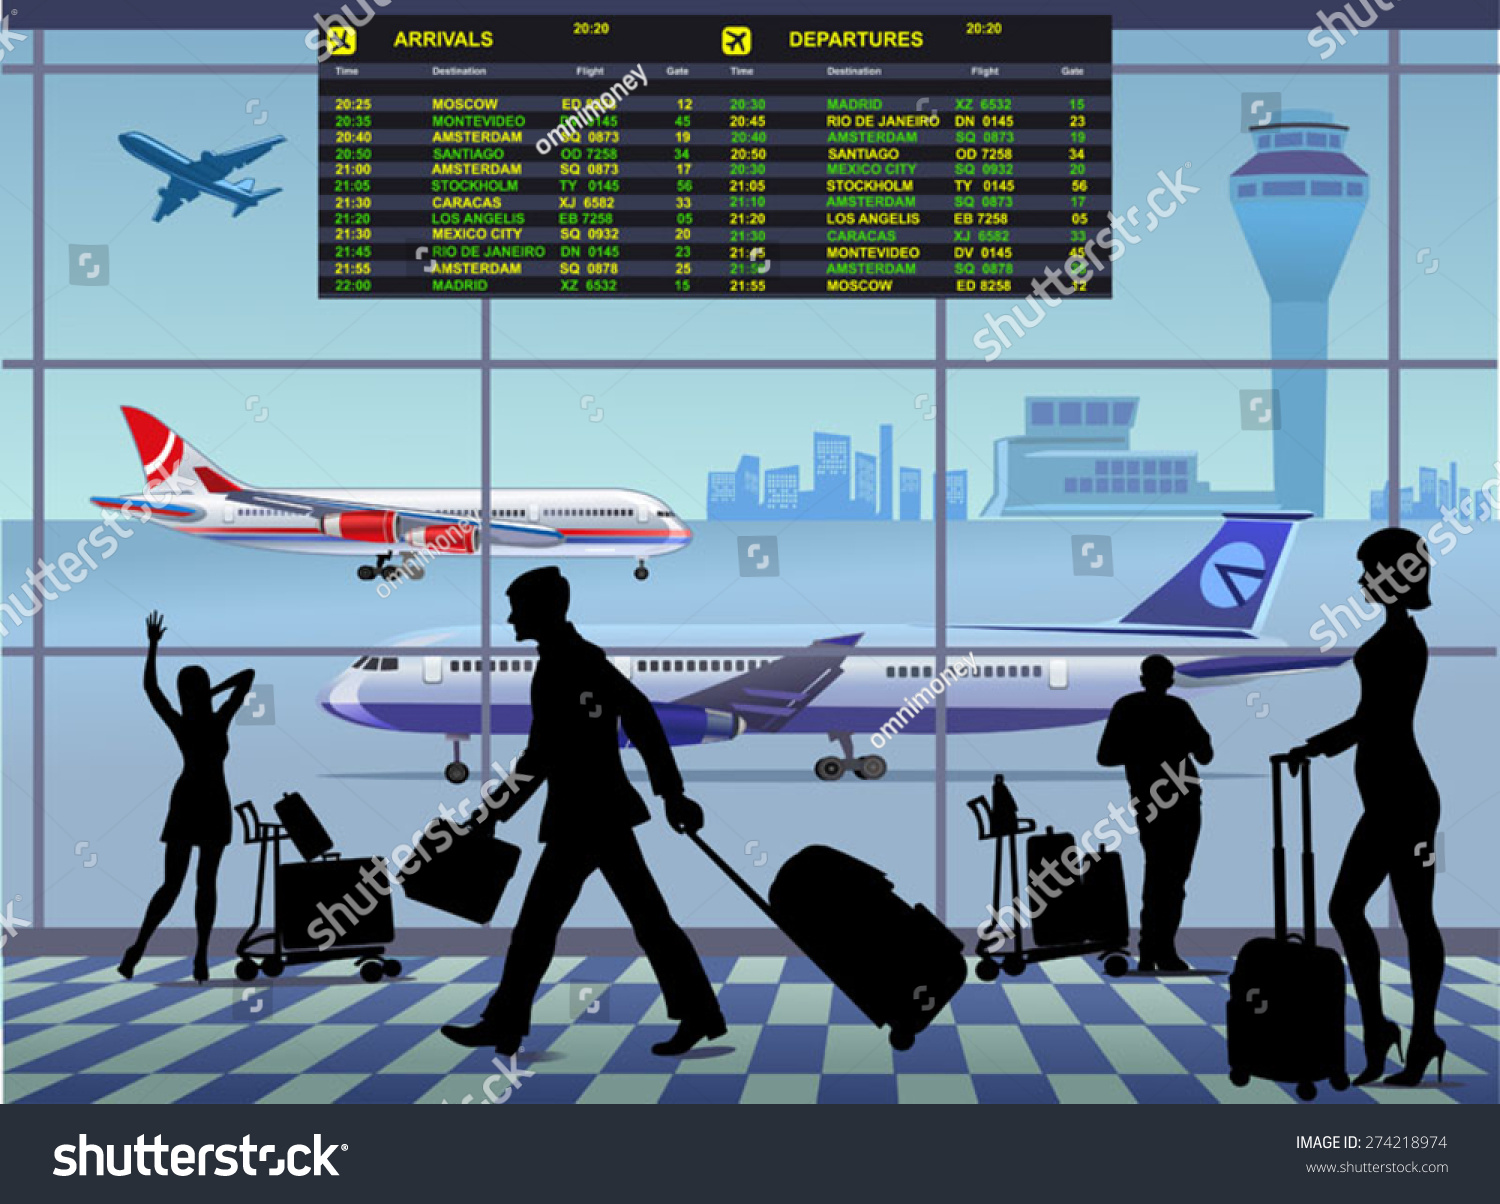 airport lounge clipart - photo #38